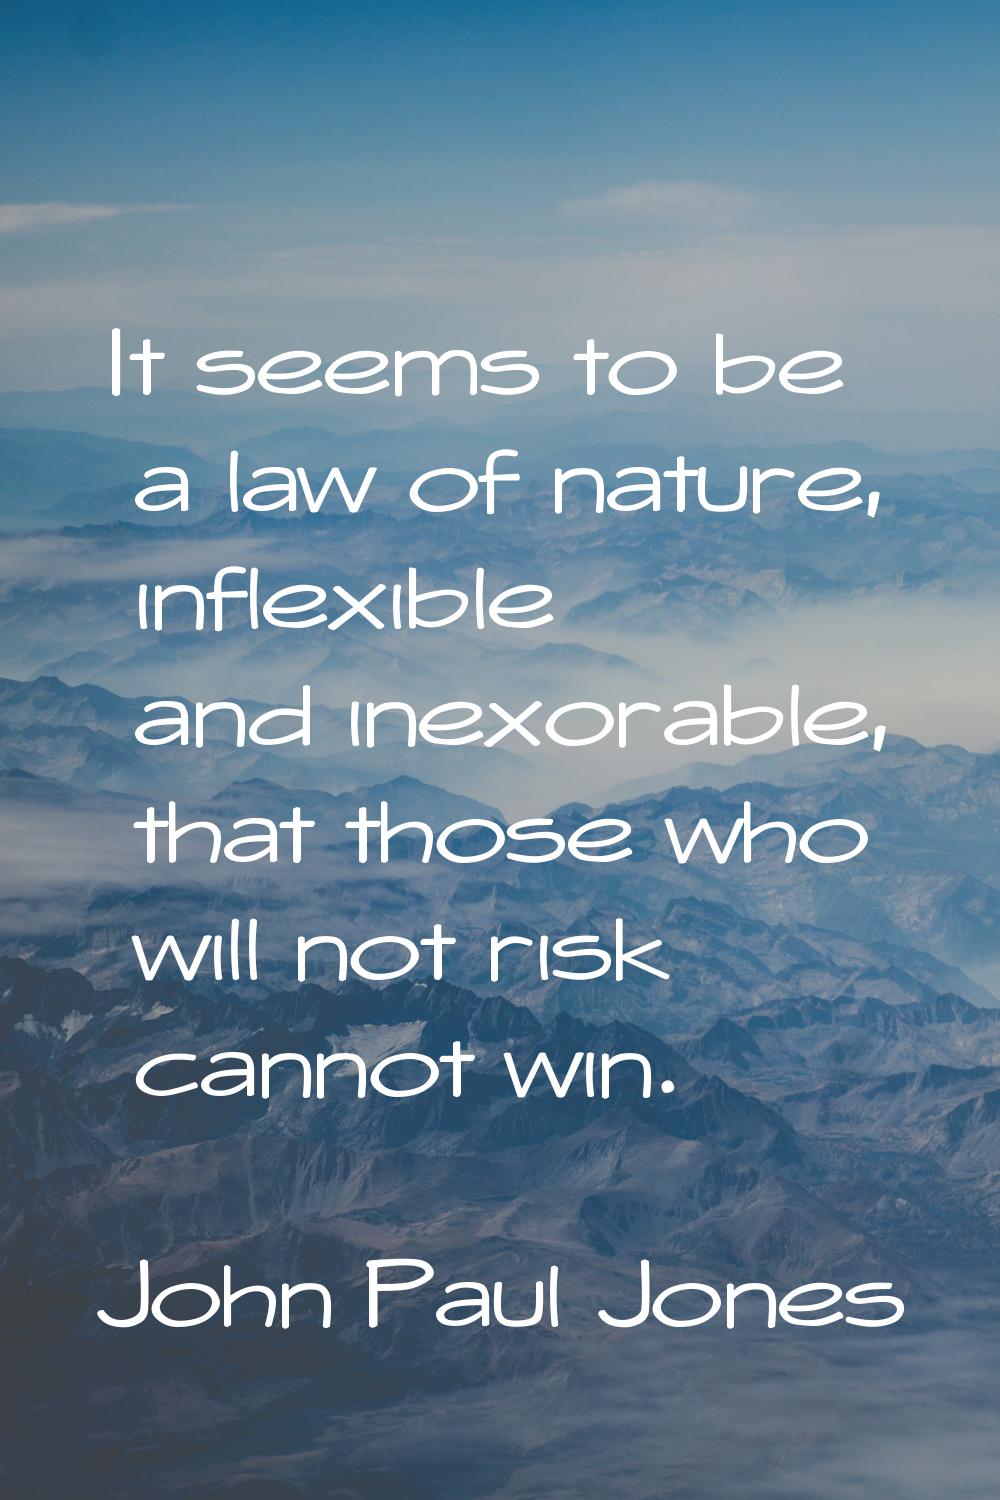 It seems to be a law of nature, inflexible and inexorable, that those who will not risk cannot win.